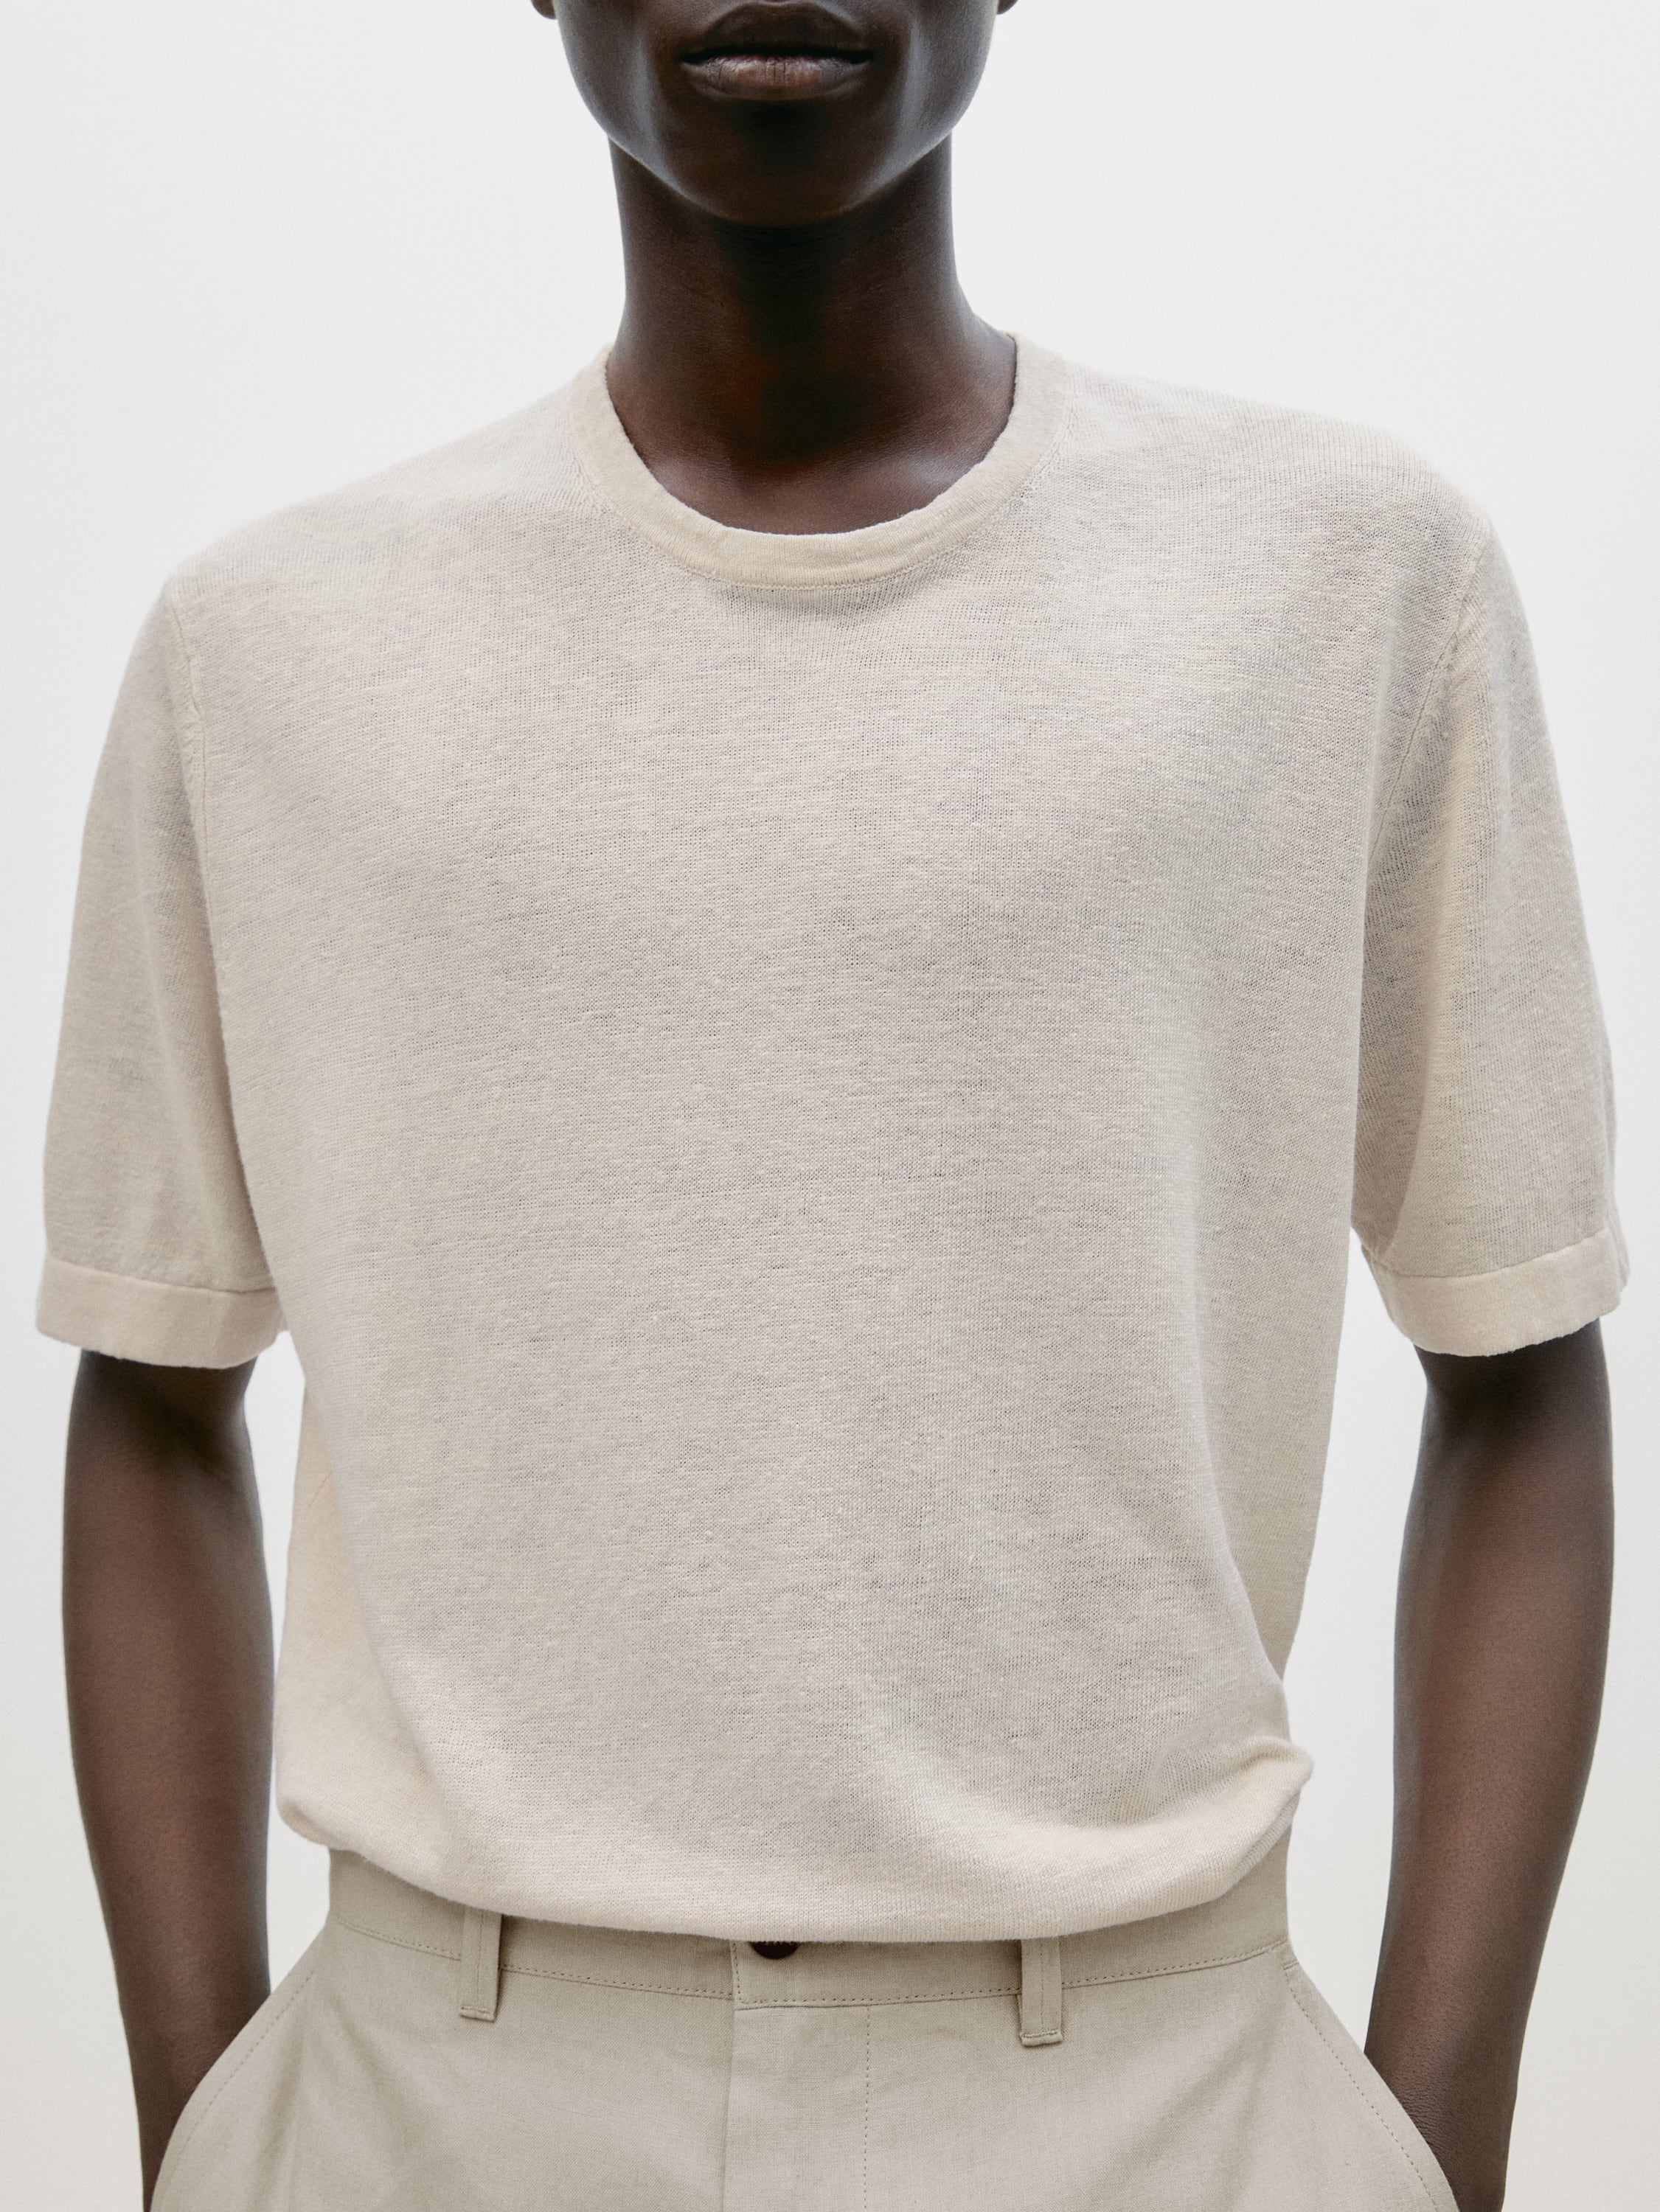 Knit short sleeve linen sweater - Limited Edition